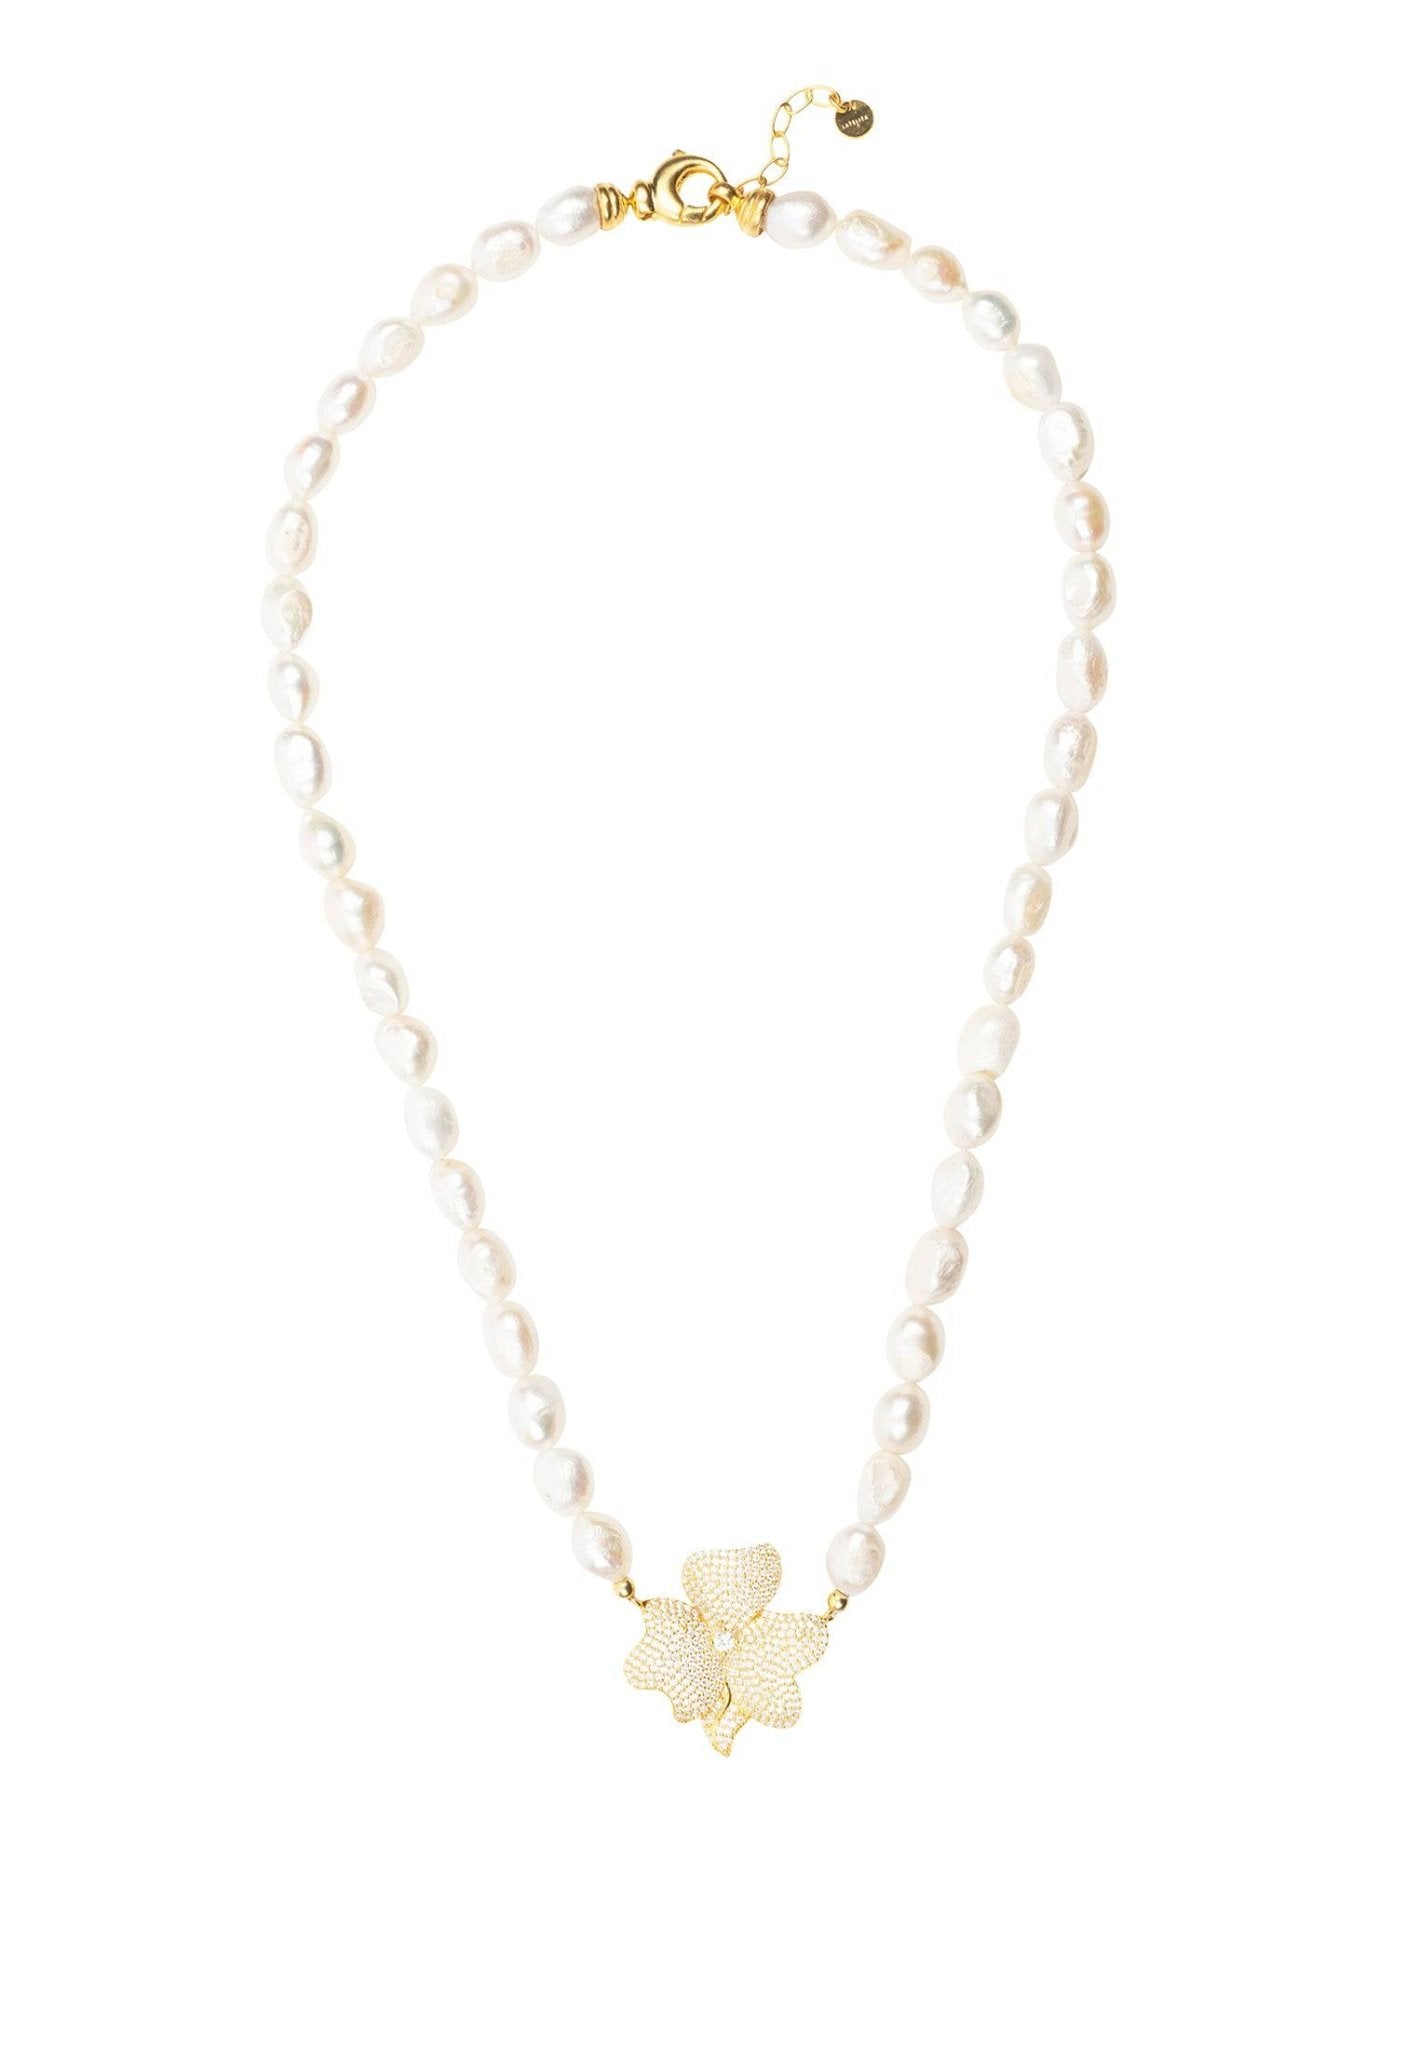 Flower Pearl Mid Length Necklace White Cz Gold - LATELITA Necklaces